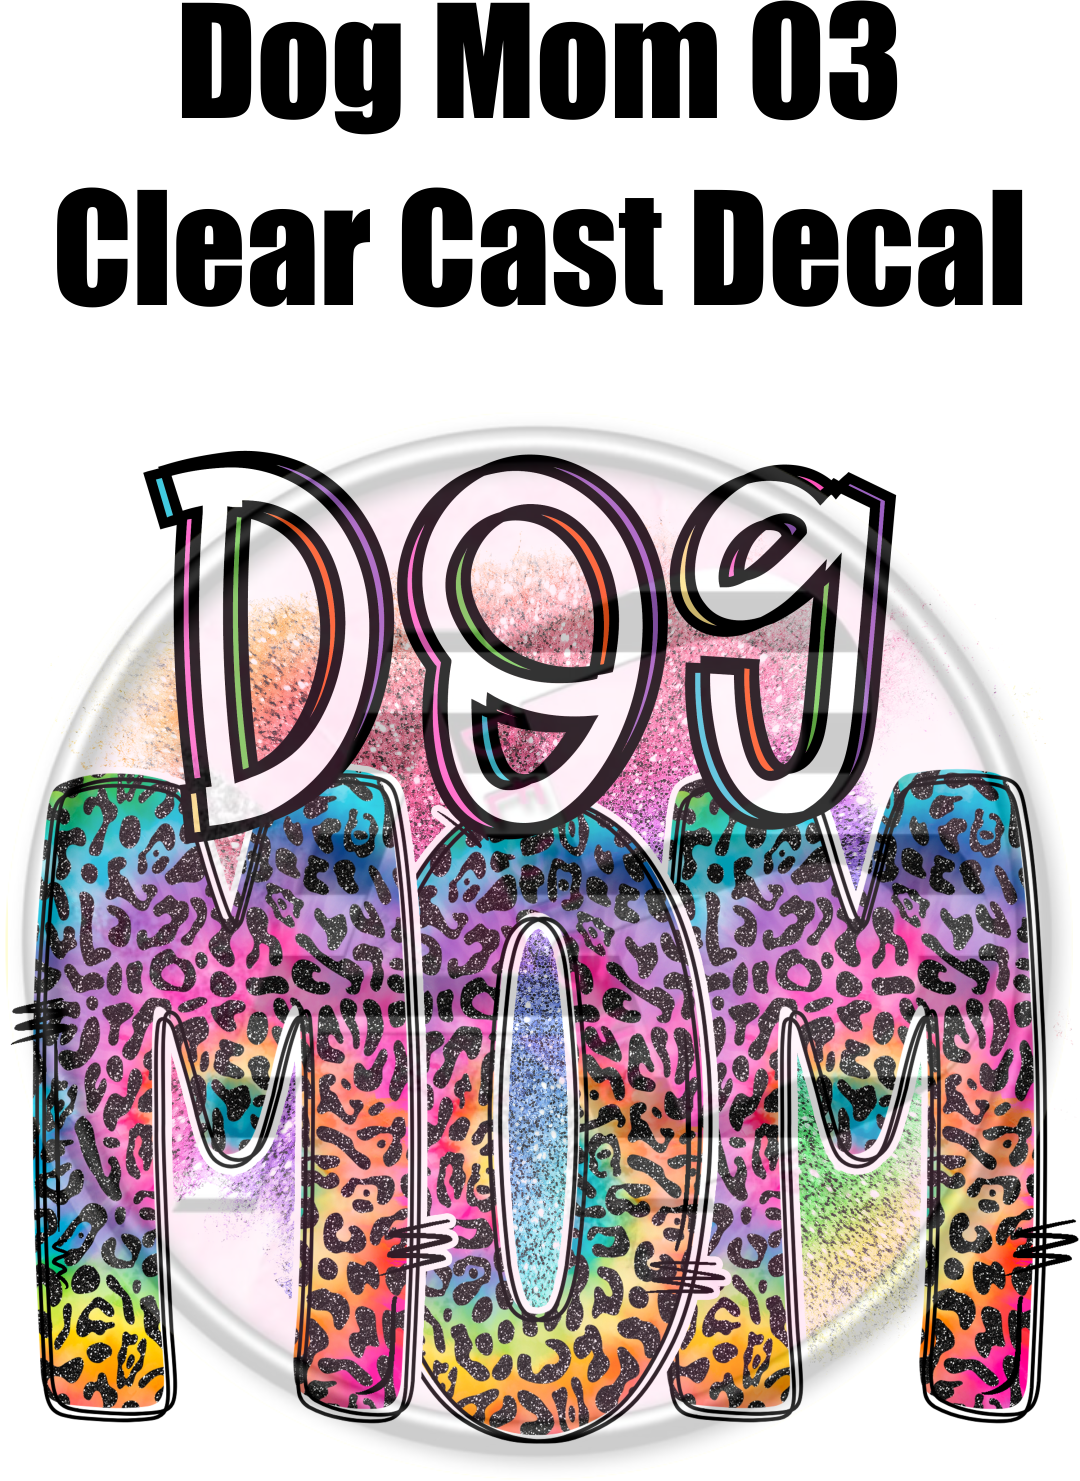 Dog Mom 03 - Clear Cast Decal